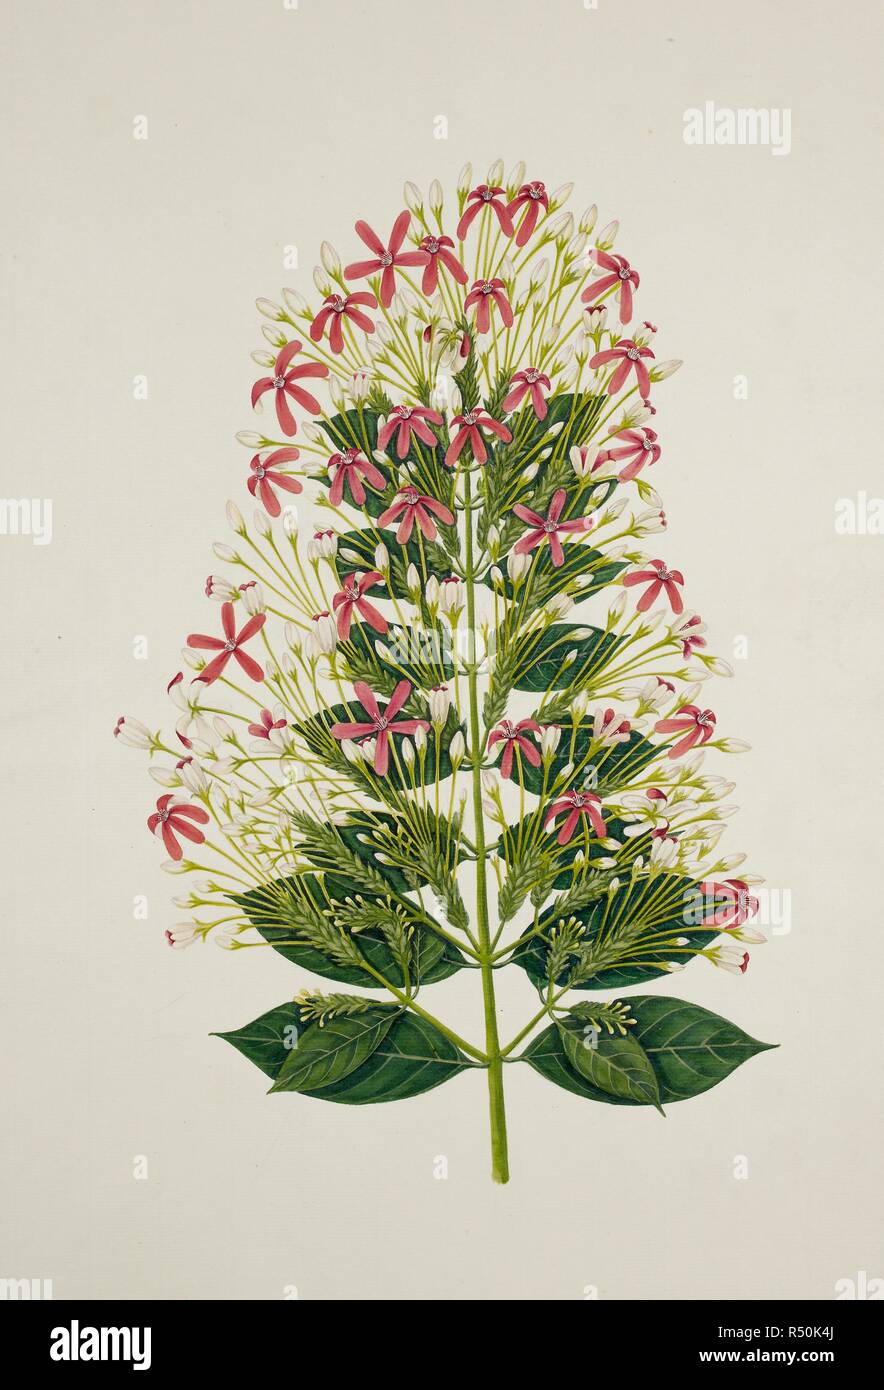 Rangoon Creeper. c.1824. Qualis Indica' L. (Combretaceae), Drunken Sailor, Rangoon Creeper. From an album of 40 drawings of plants made by Chinese artists at Bencoolen, Sumatra, for Sir Stamford Raffles. Watercolour.  Originally published/produced in c.1824. . Source: NHD 48/1,. Stock Photo